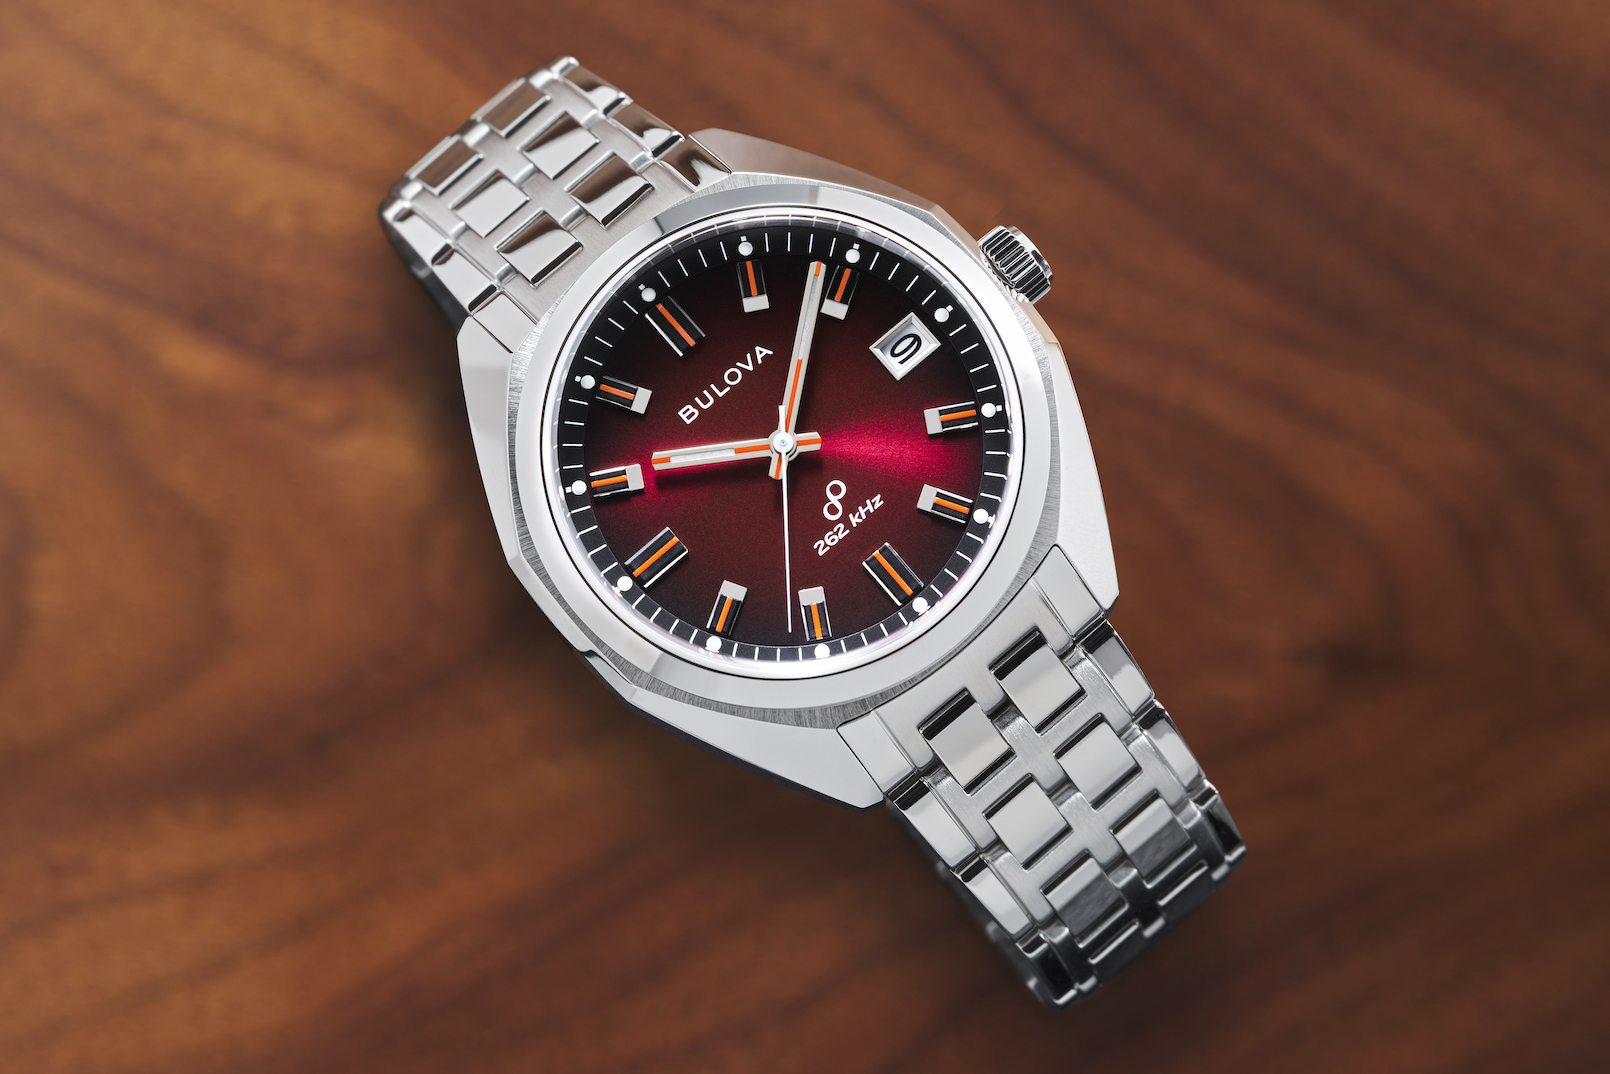 Bulova Jet Star series of watches is inspired by a 1973 archival model.